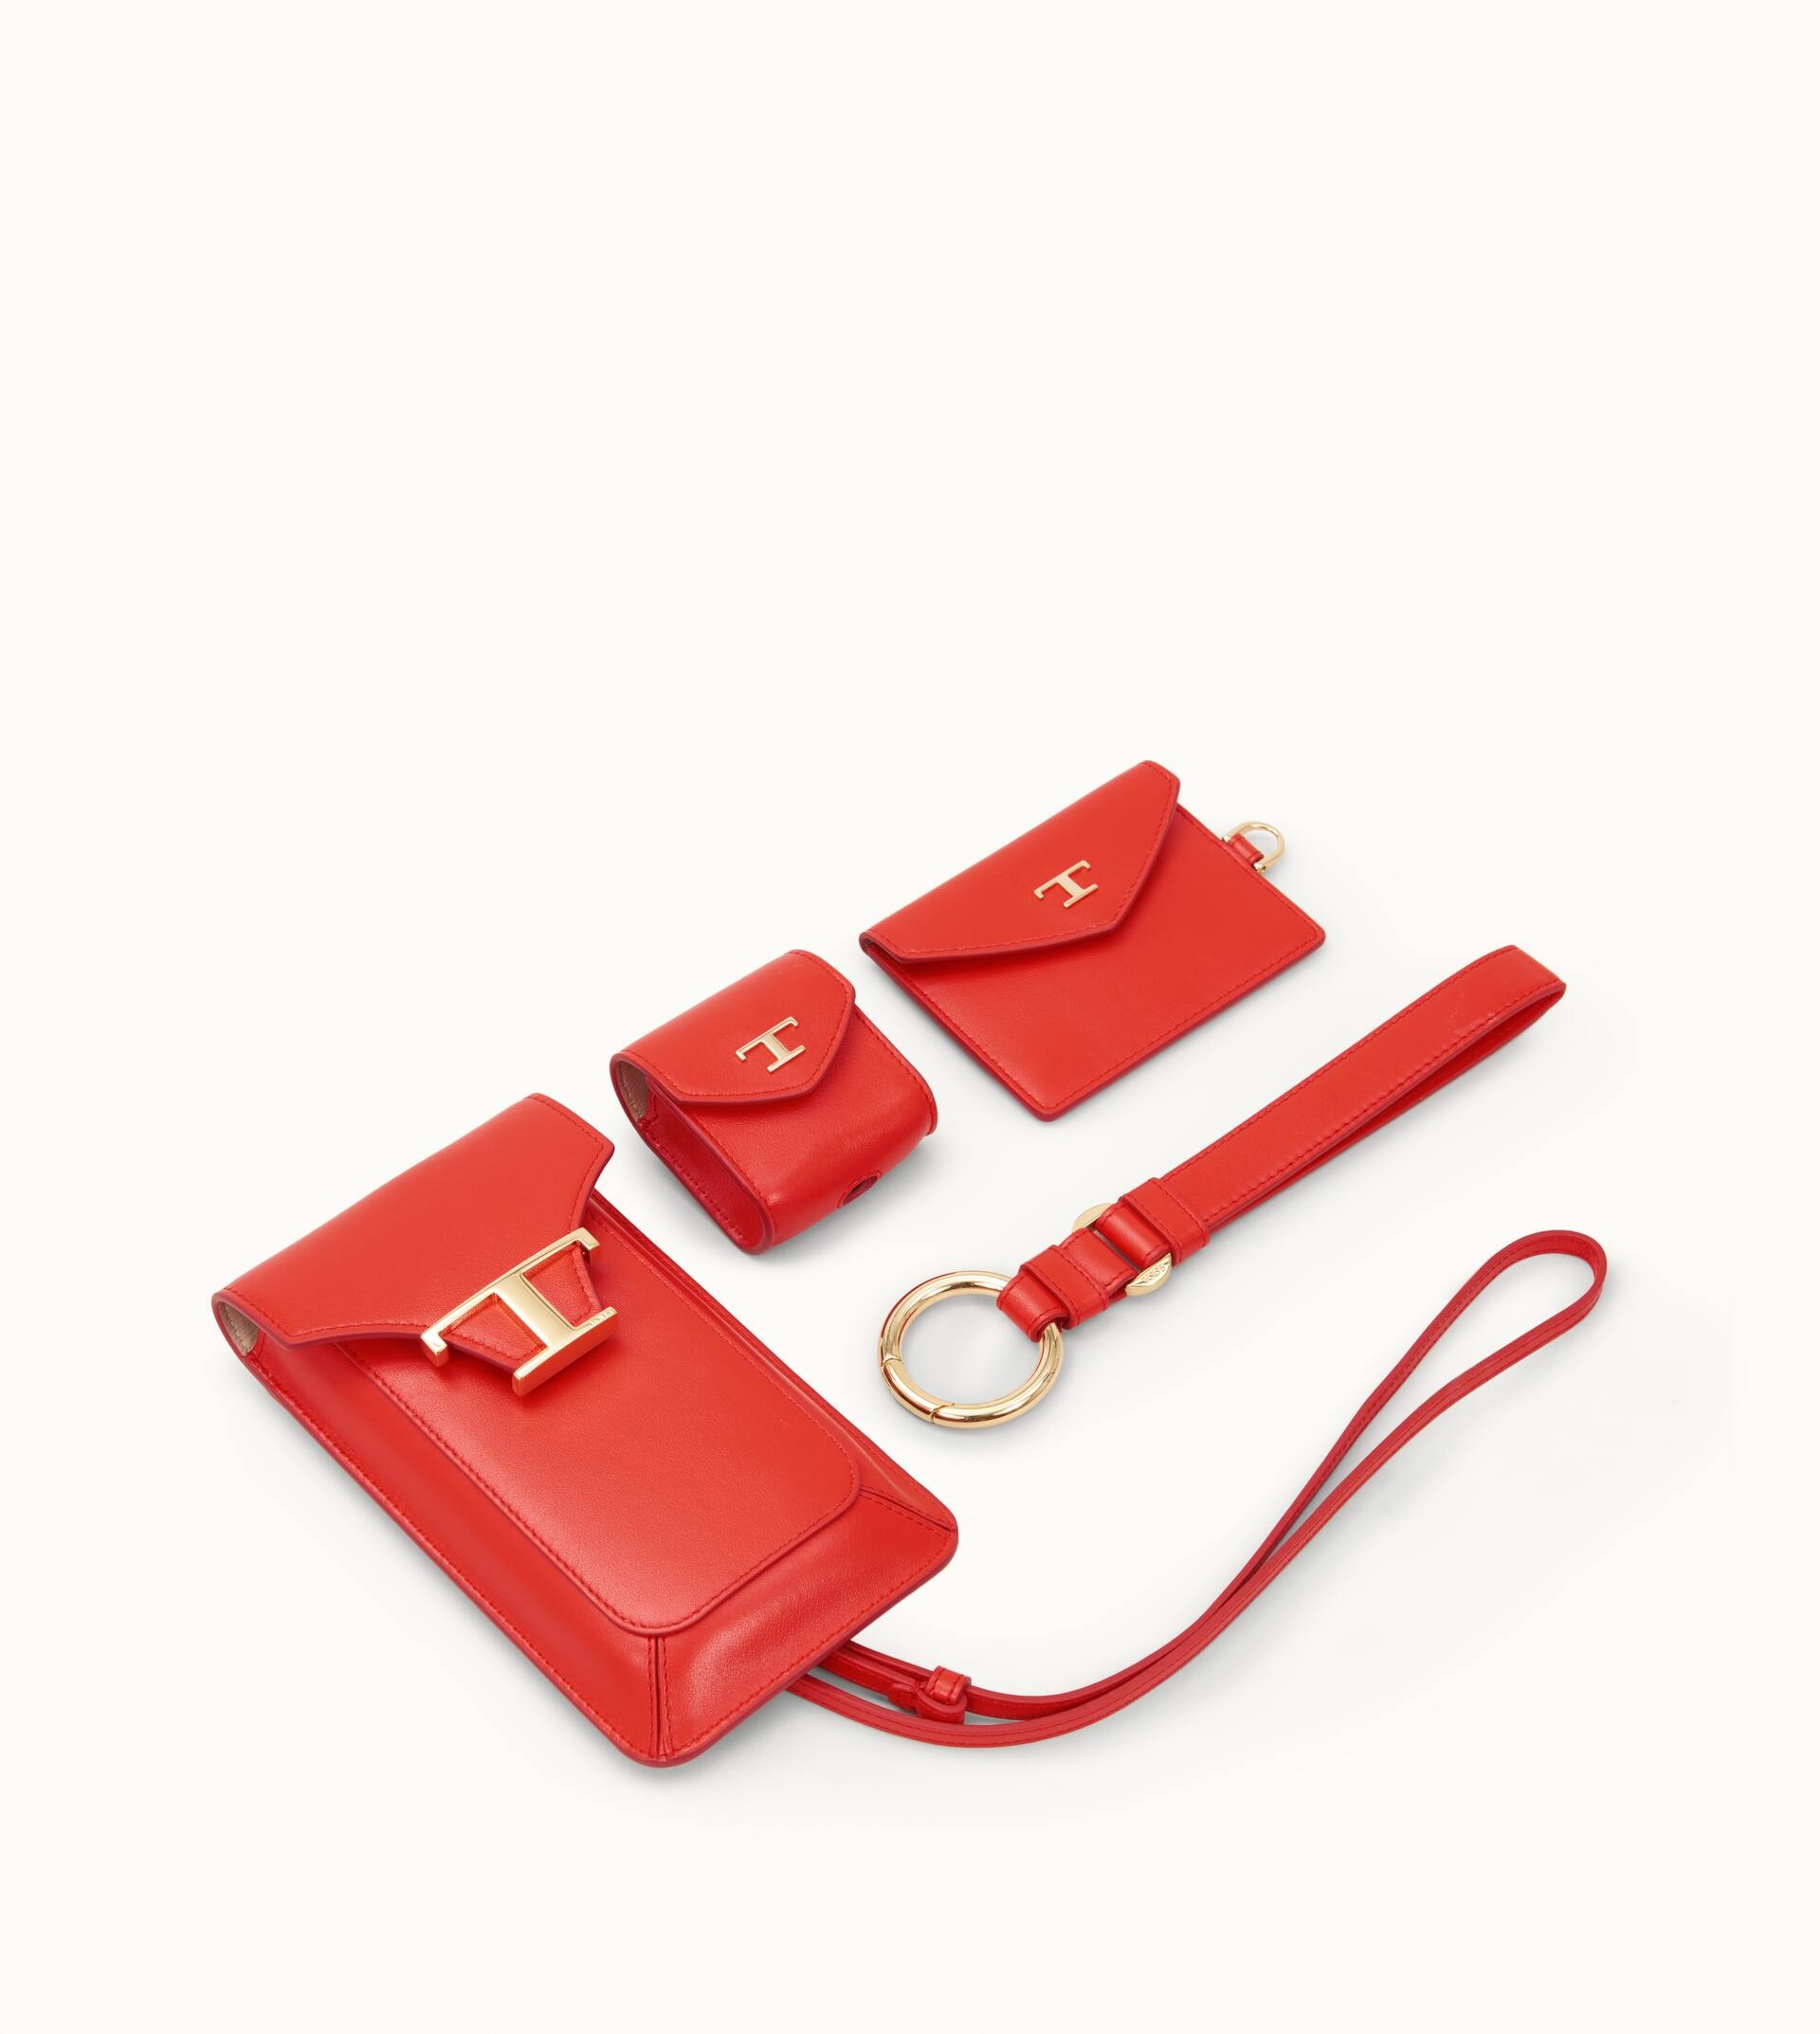 IPHONE 3 IN 1 HOLDER - RED - 3